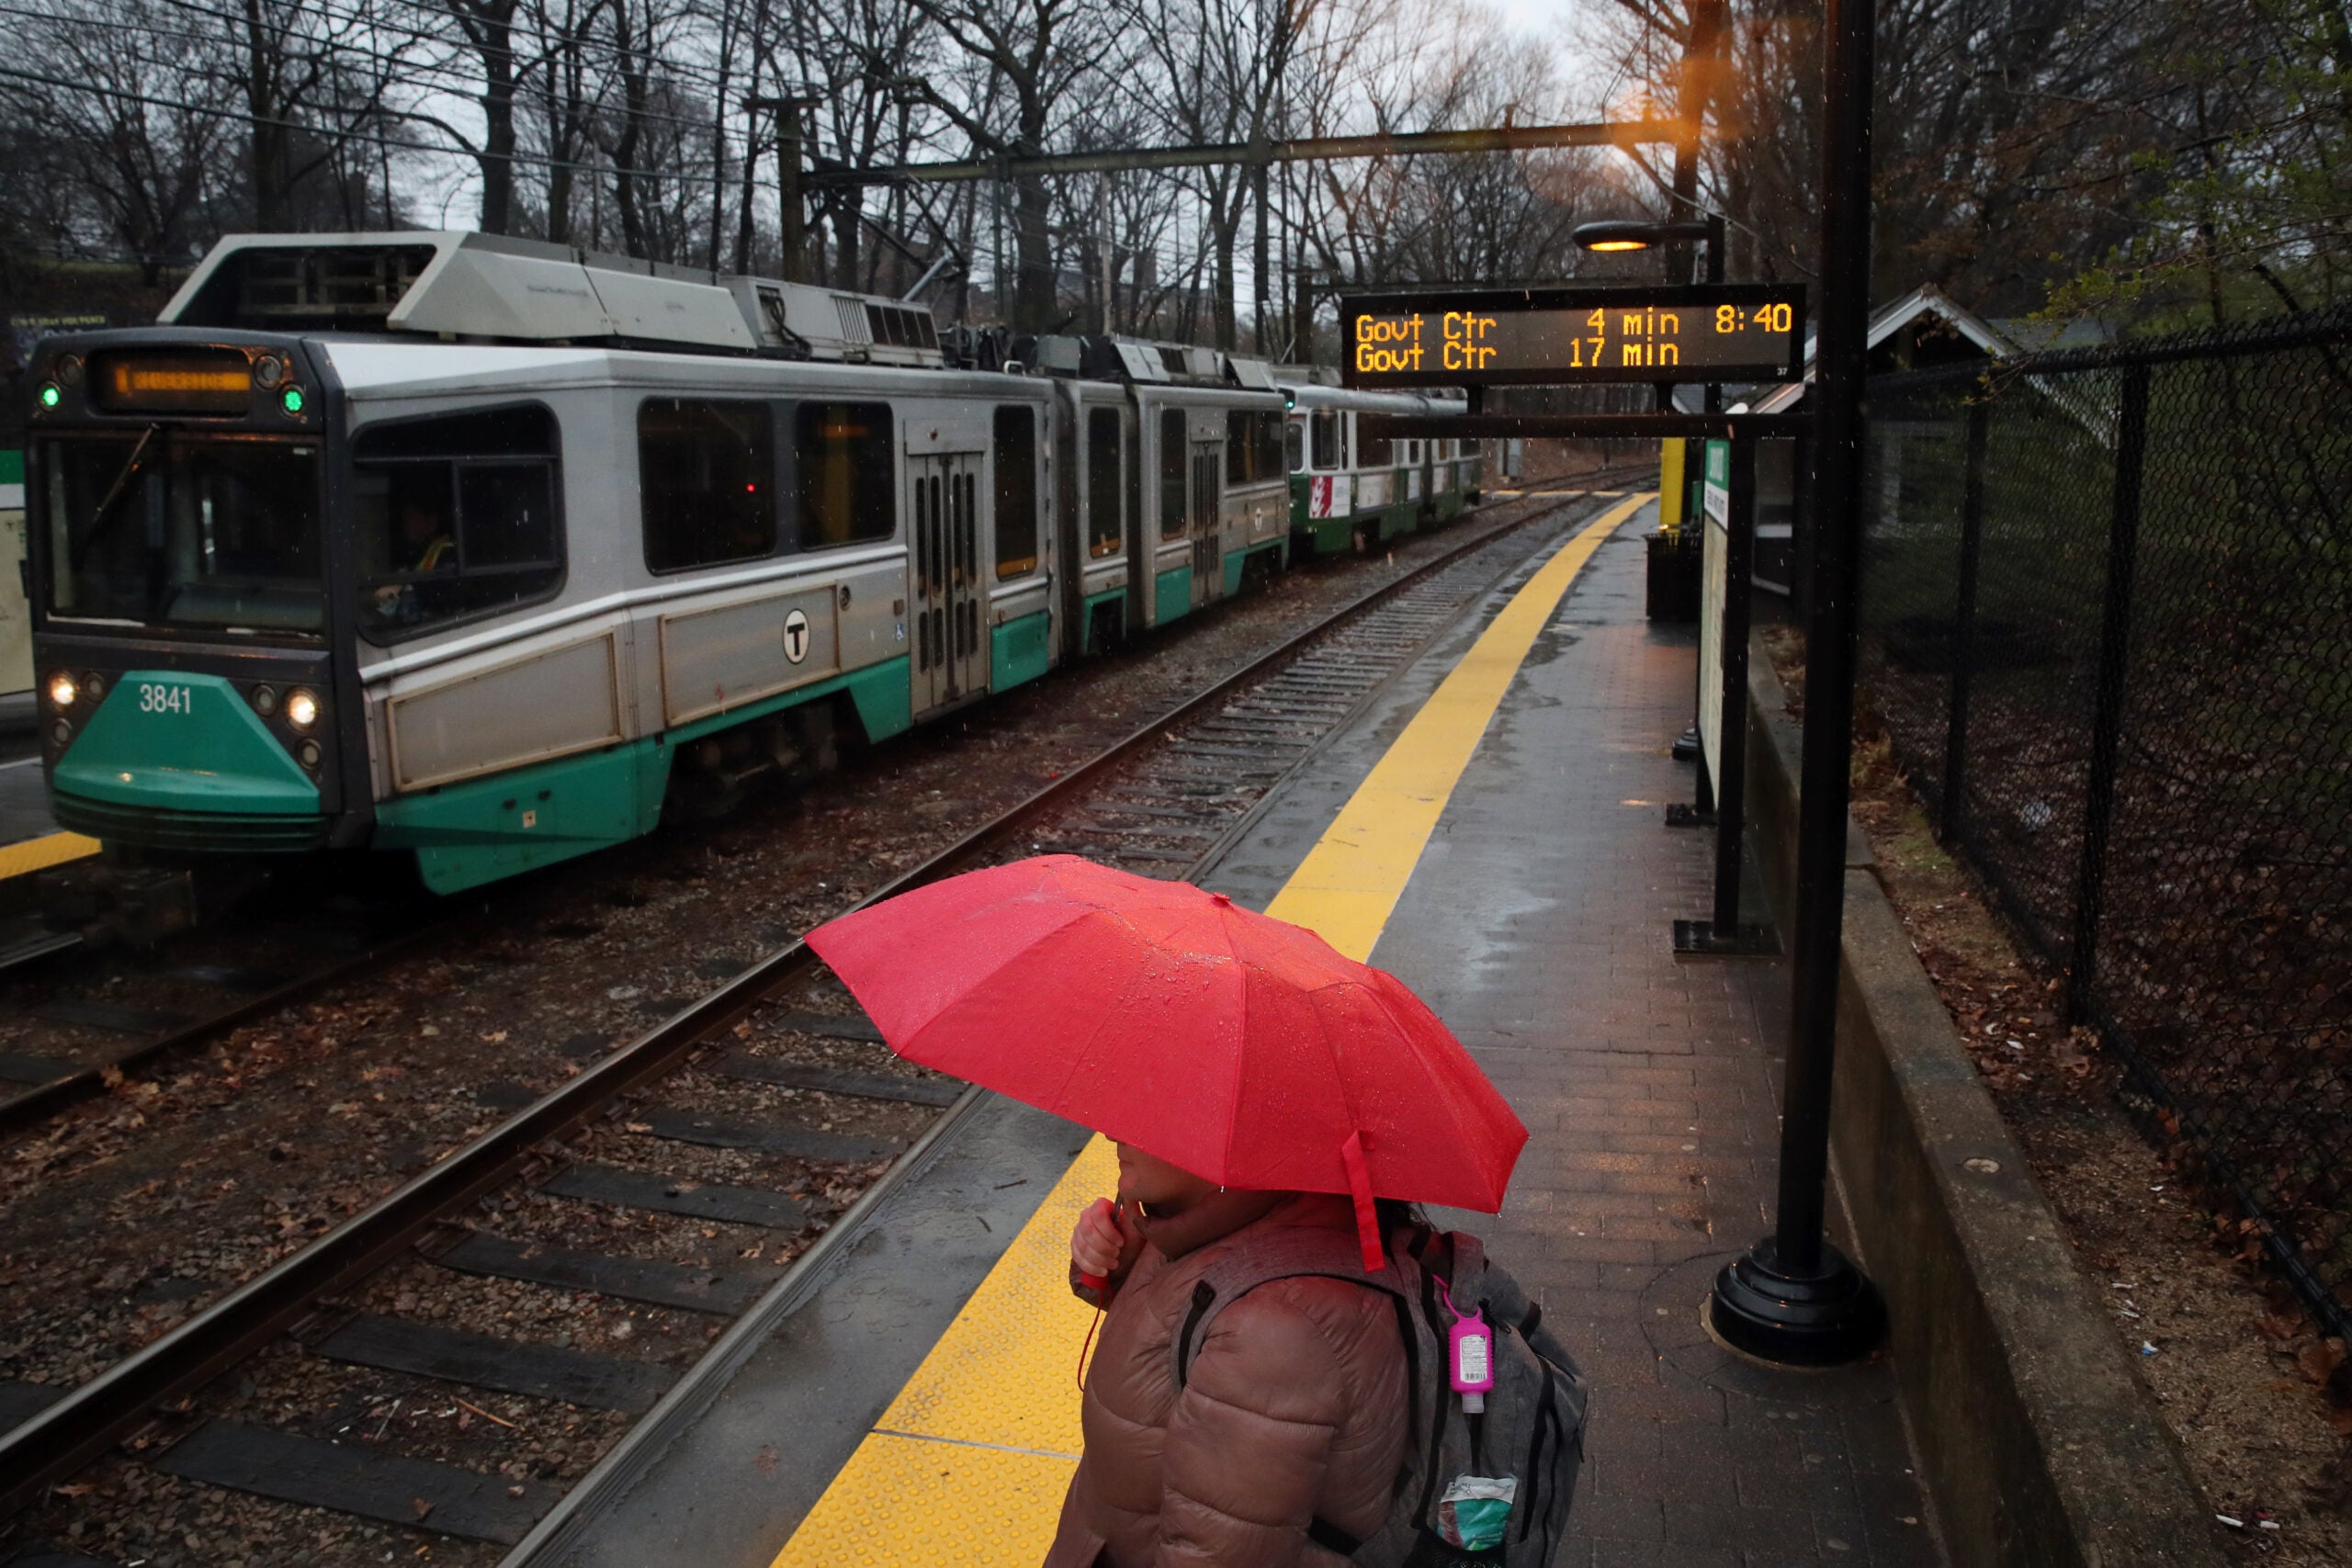 The MBTA is preparing for a future with ‘supercars’ on the Green Line